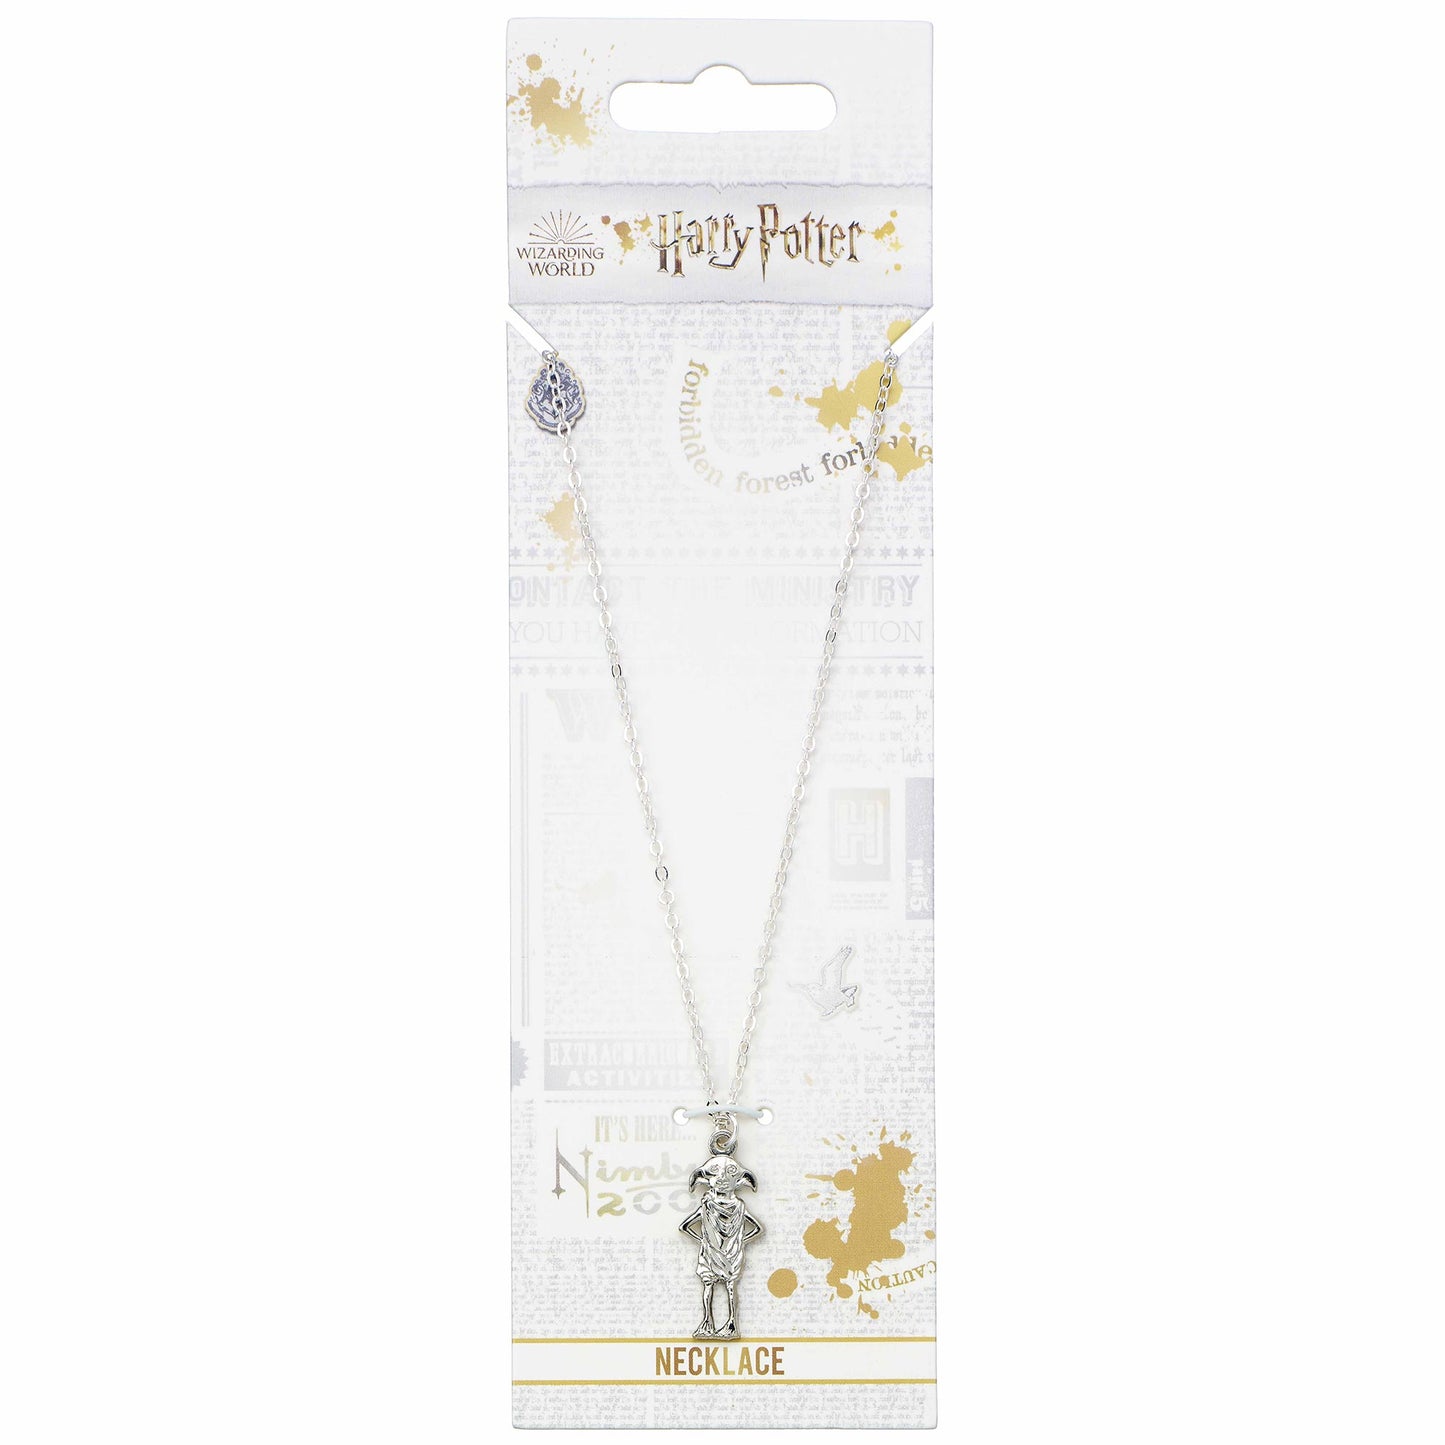 Harry Potter  Dobby the House Elf Necklace - Silver